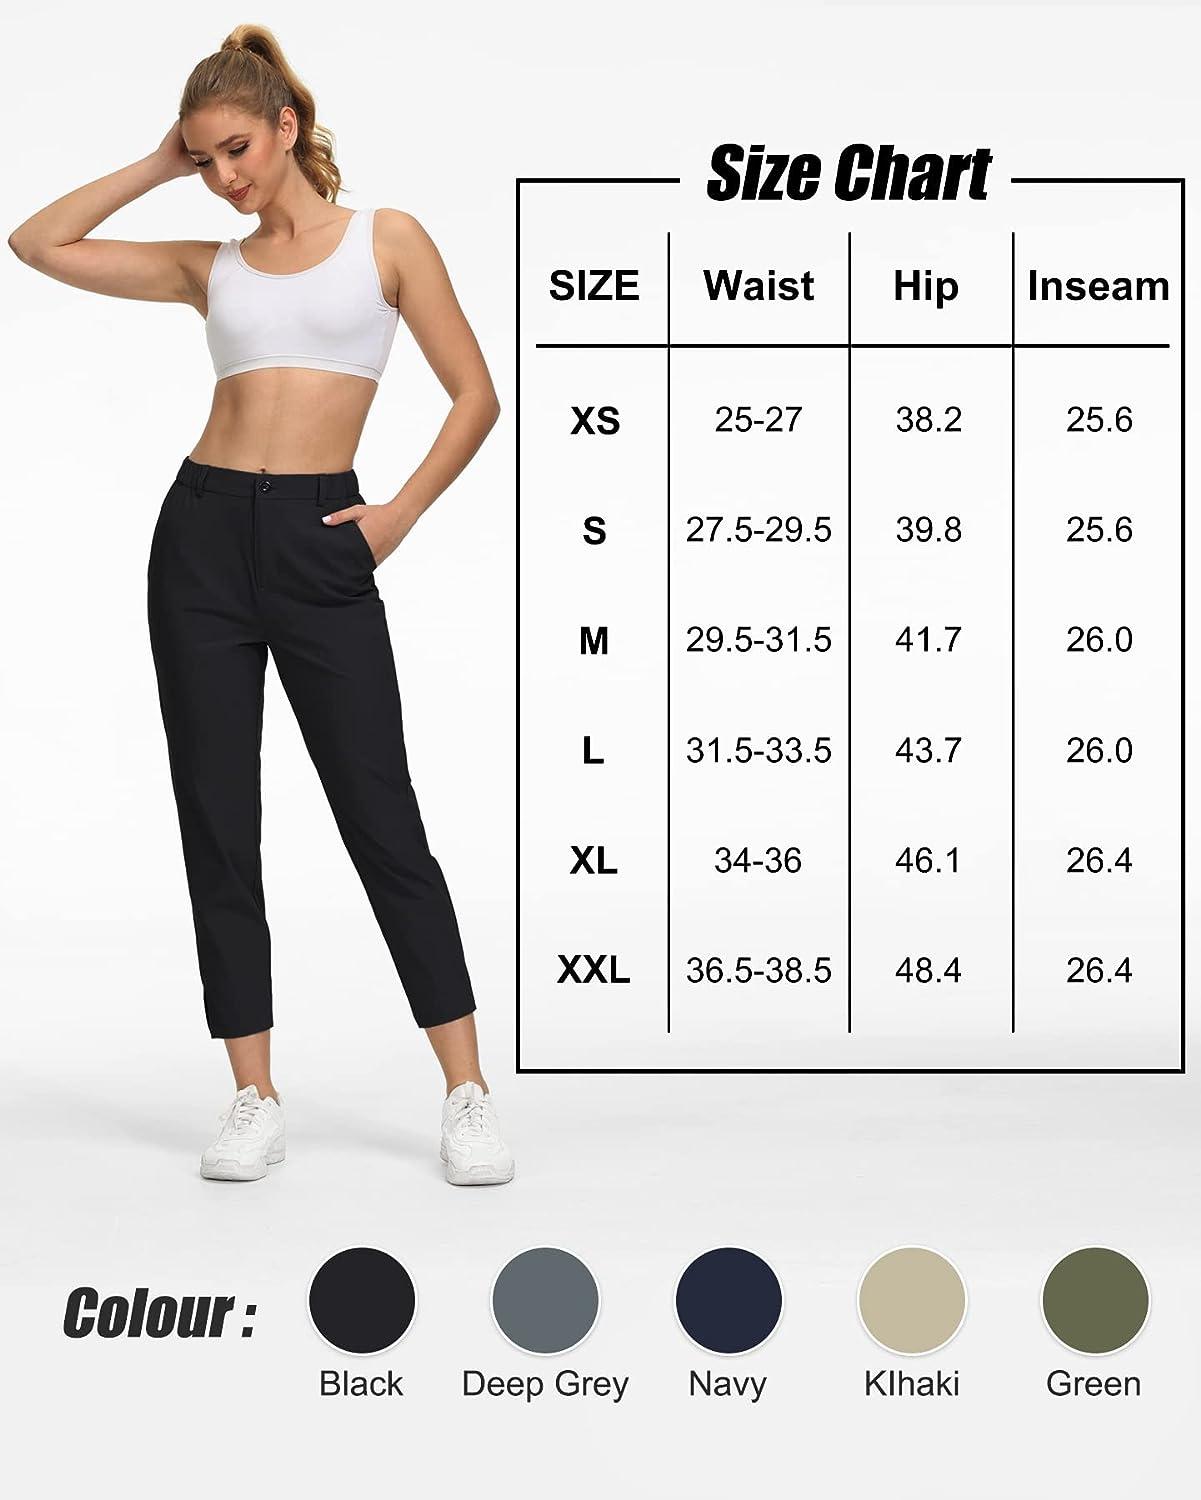 Black High Waist Trousers for Women, Business Casual Trousers for